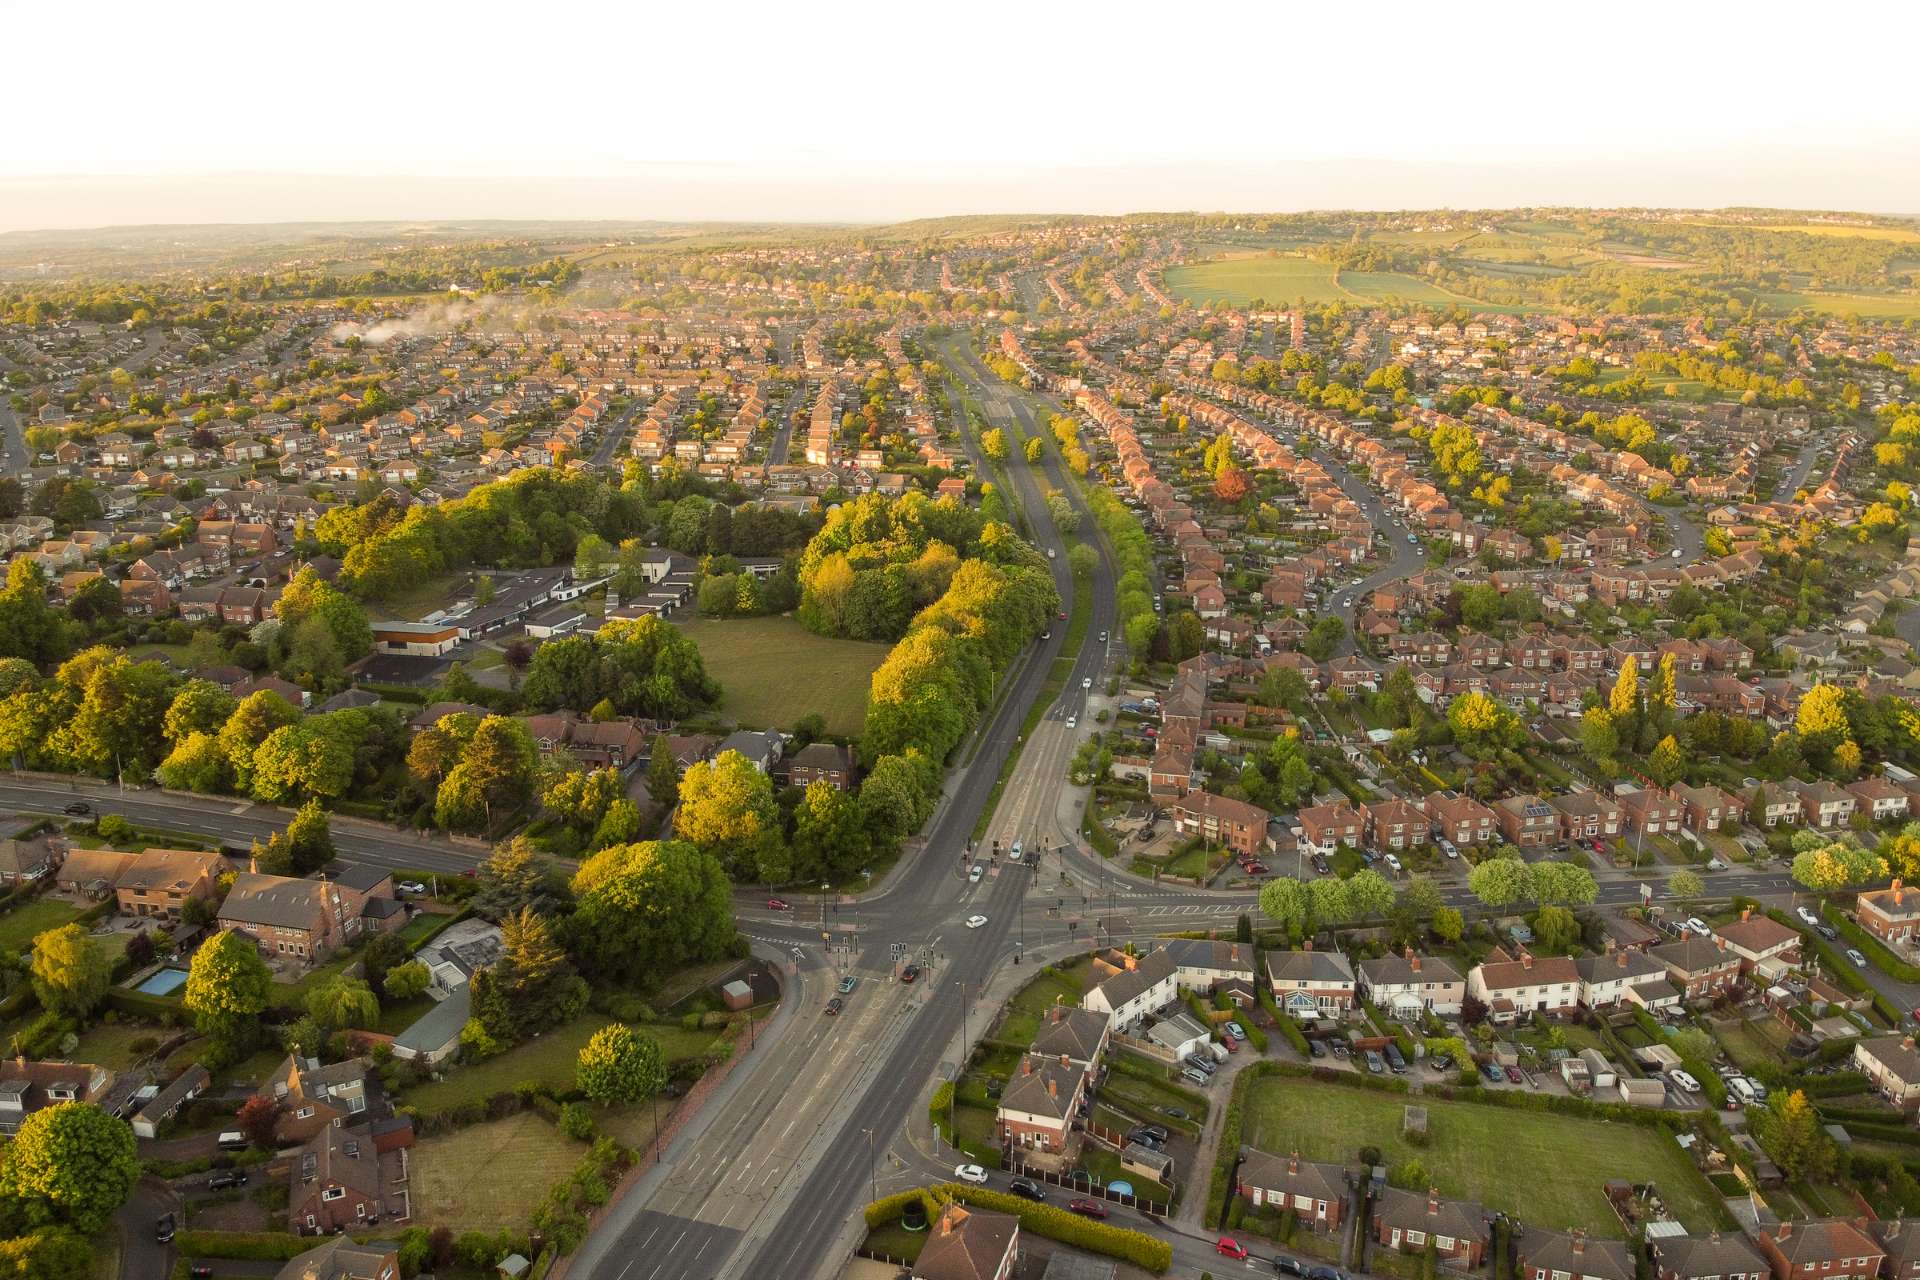 View of Rotherham by drone